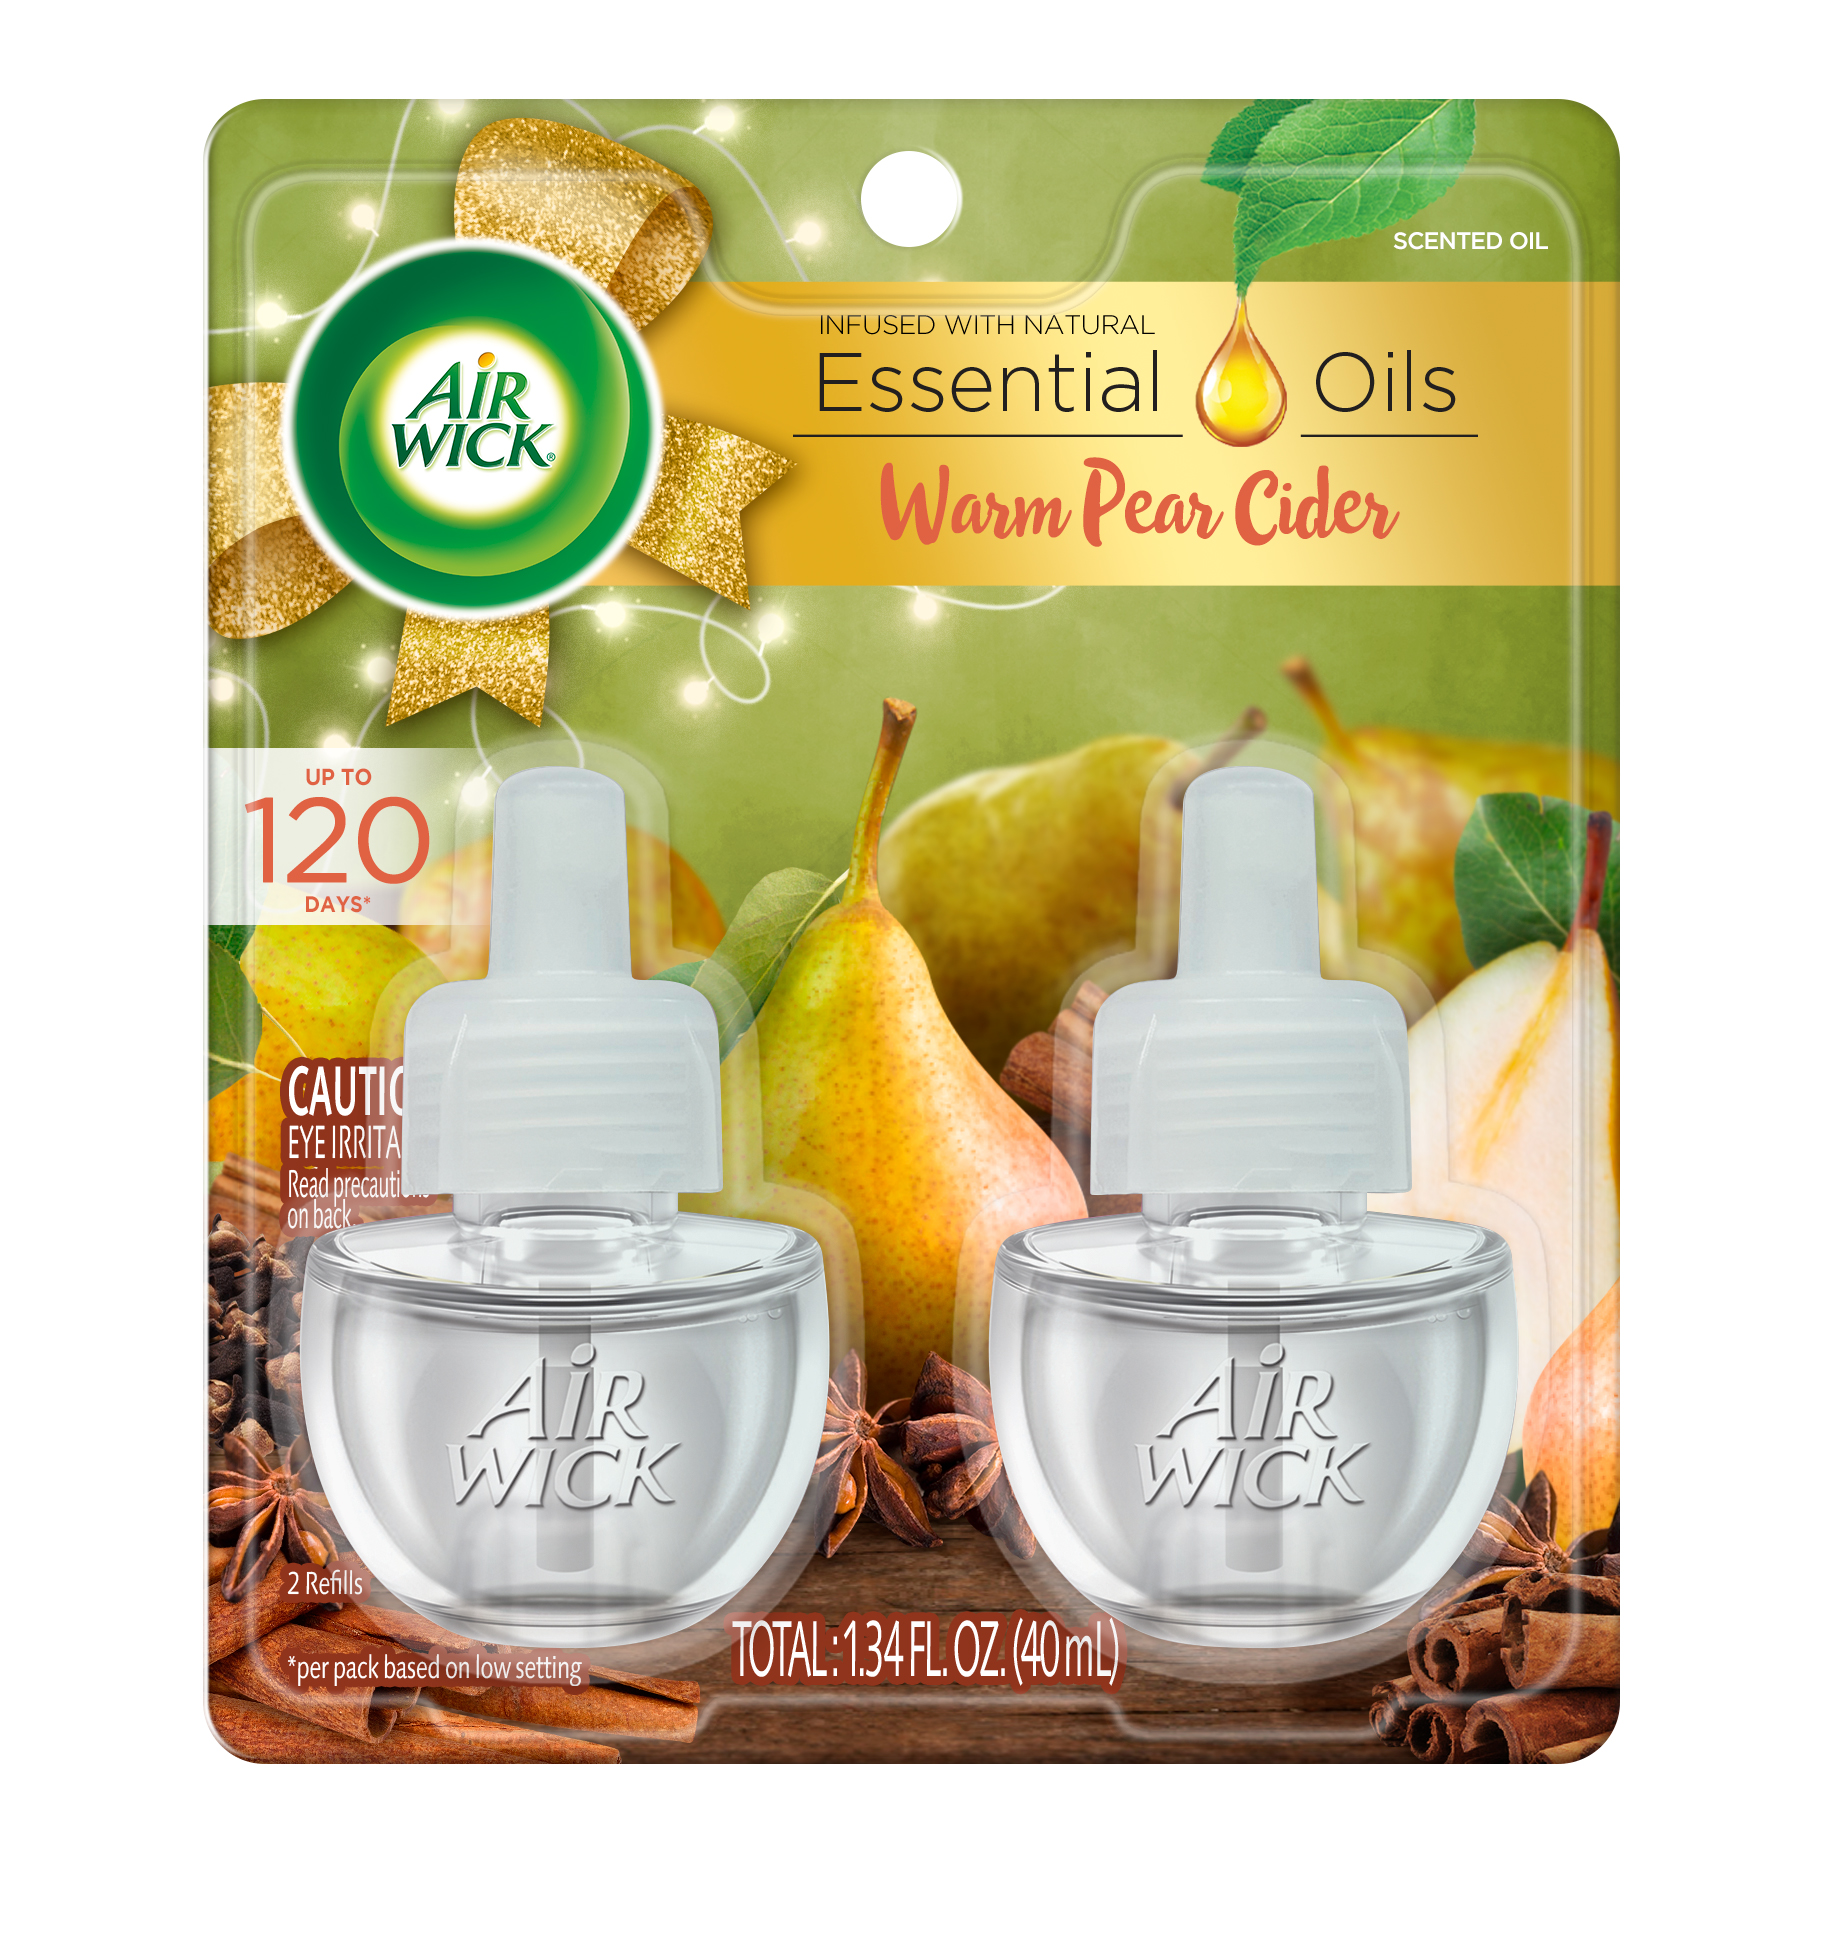 AIR WICK® Scented Oil - Warm Pear Cider (Discontinued)